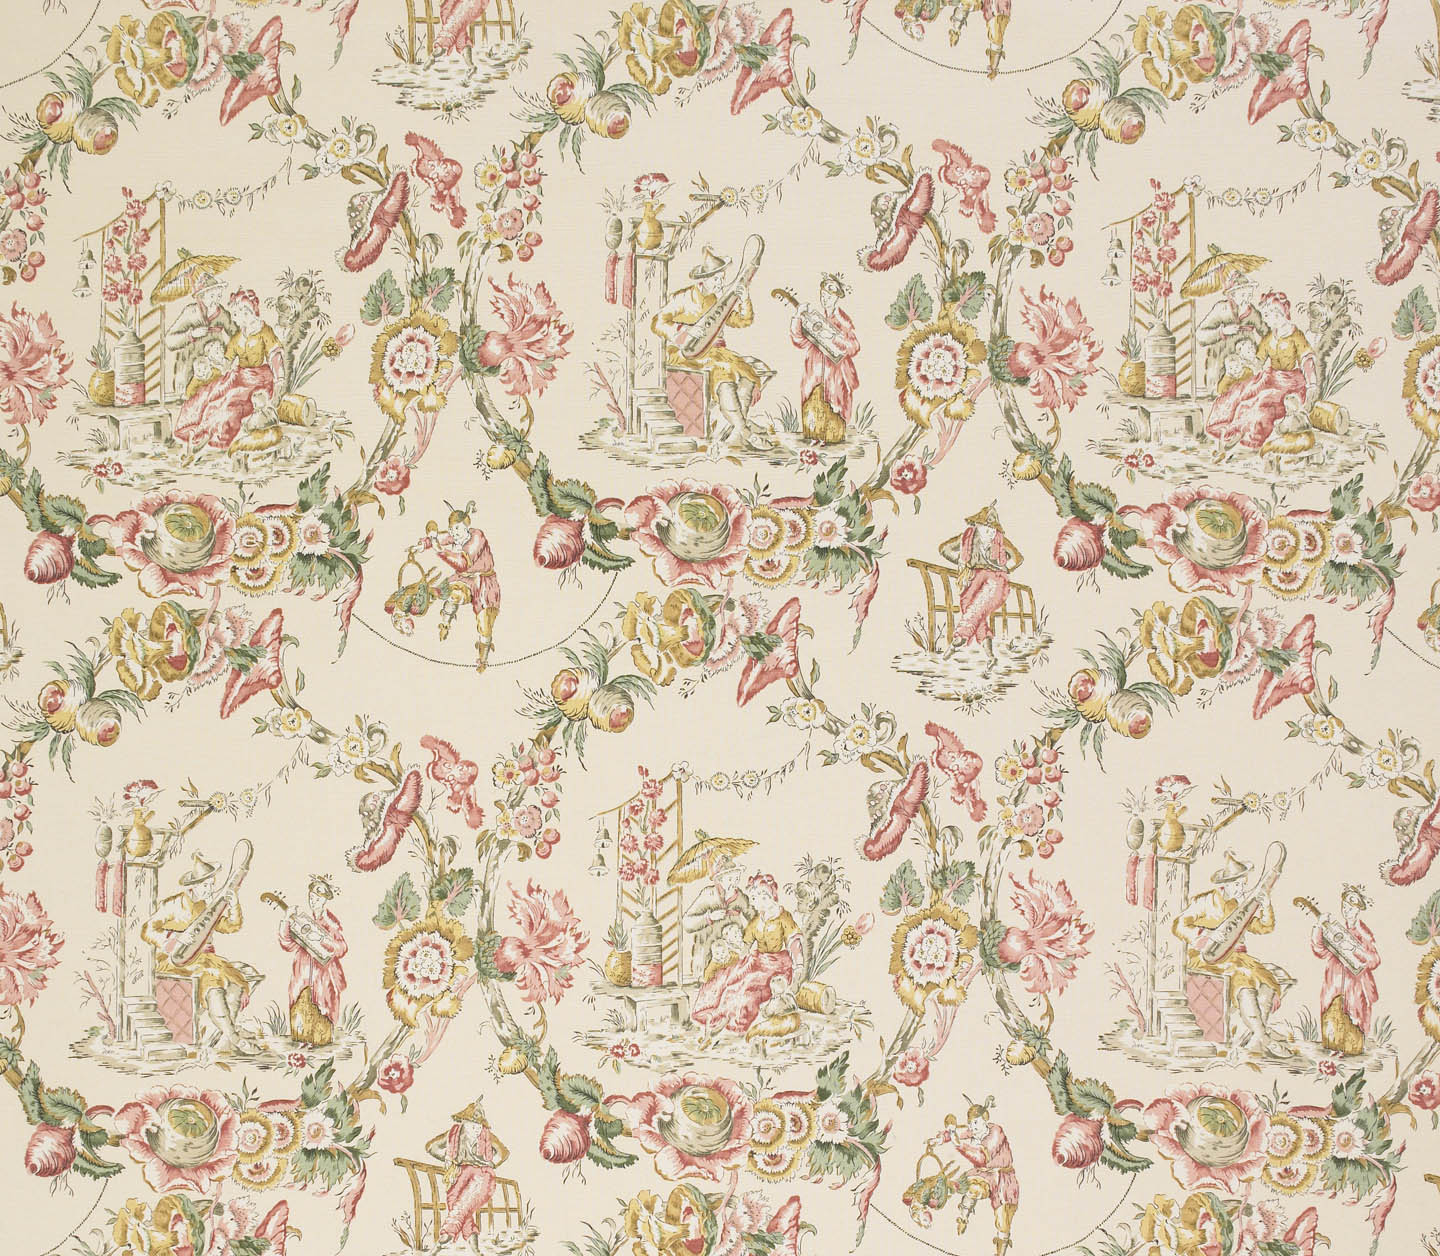 Source Url Marvictextiles Co Uk Cathay Toile Almond